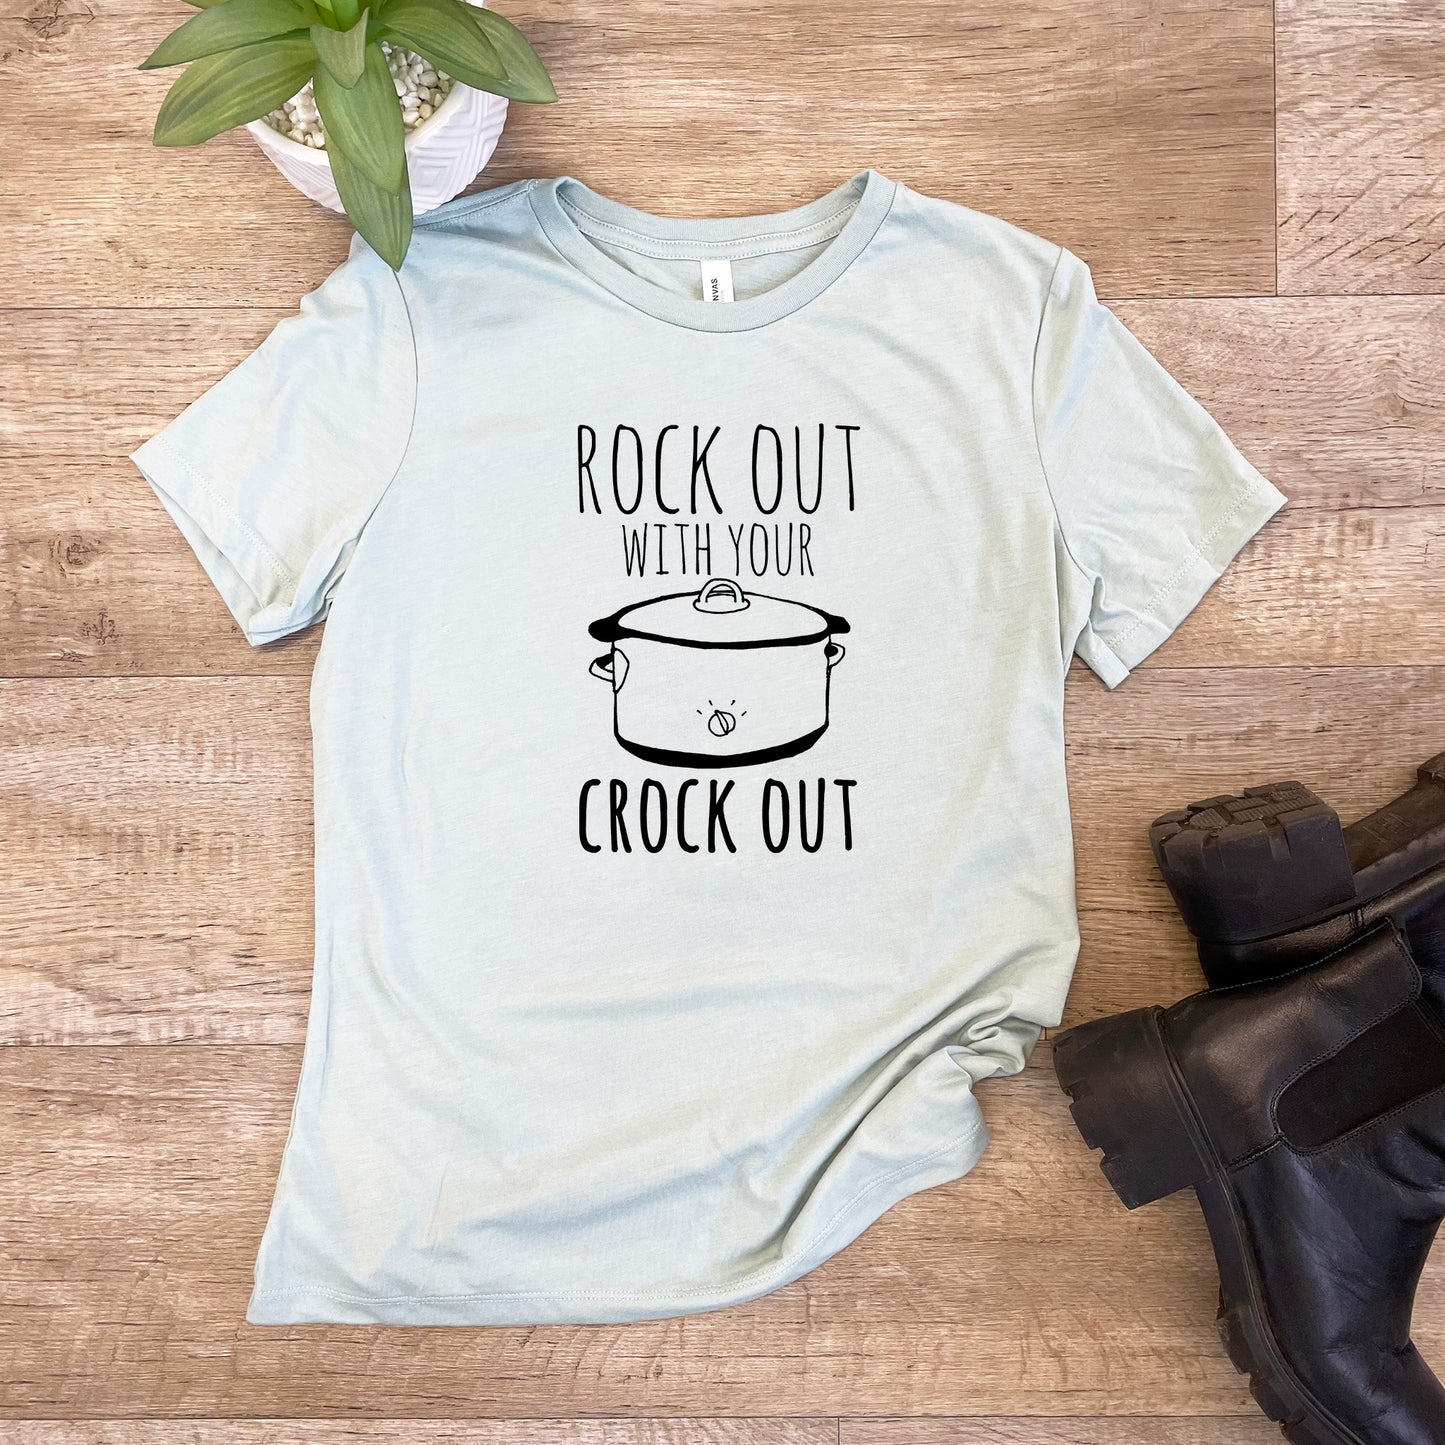 Rock Out With Your Crock Out - Women's Crew Tee - Olive or Dusty Blue